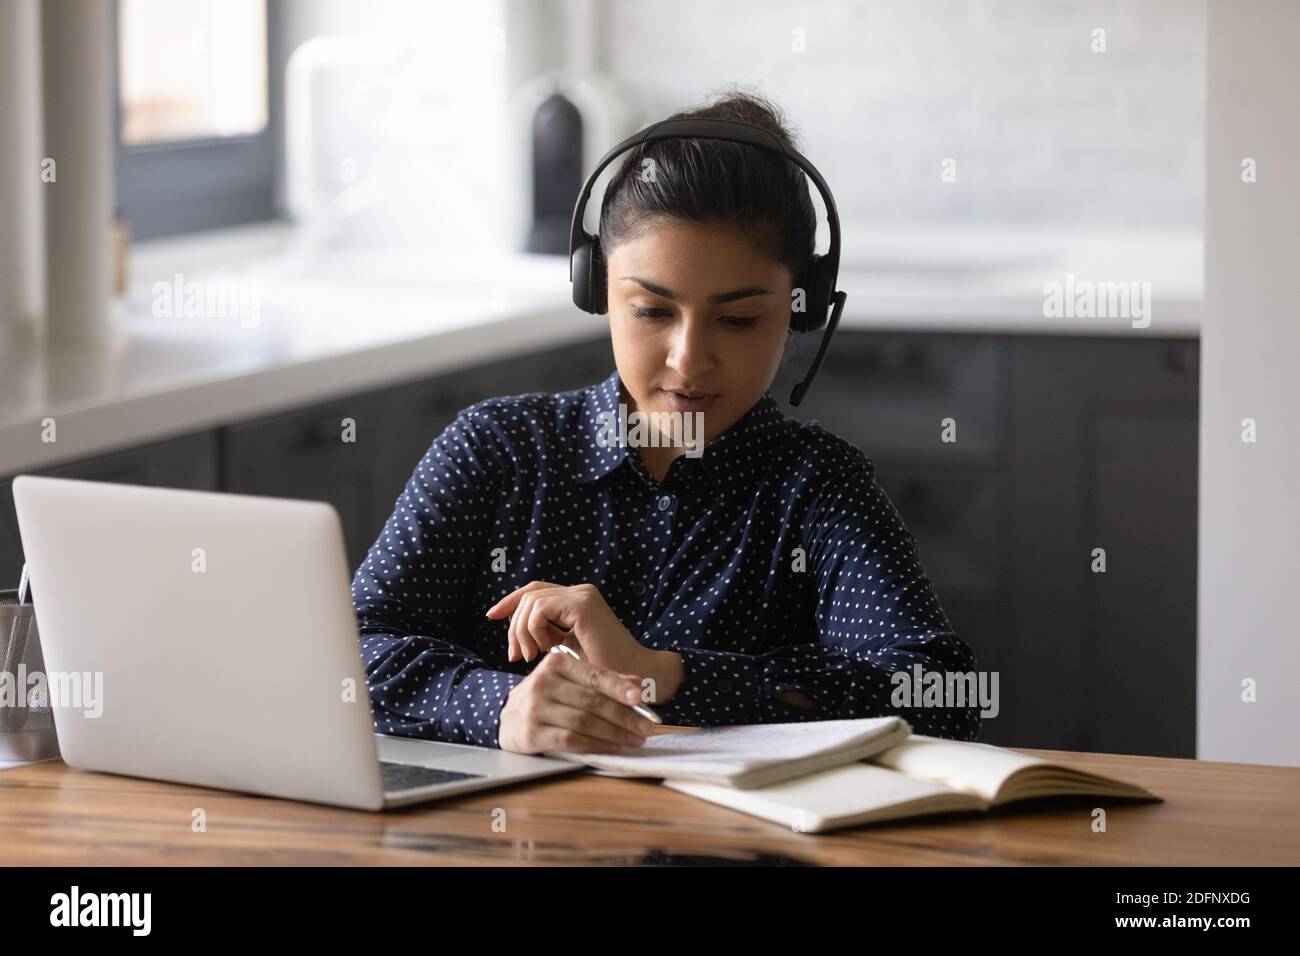 Indian female sitting by laptop wearing headphones getting education online Stock Photo